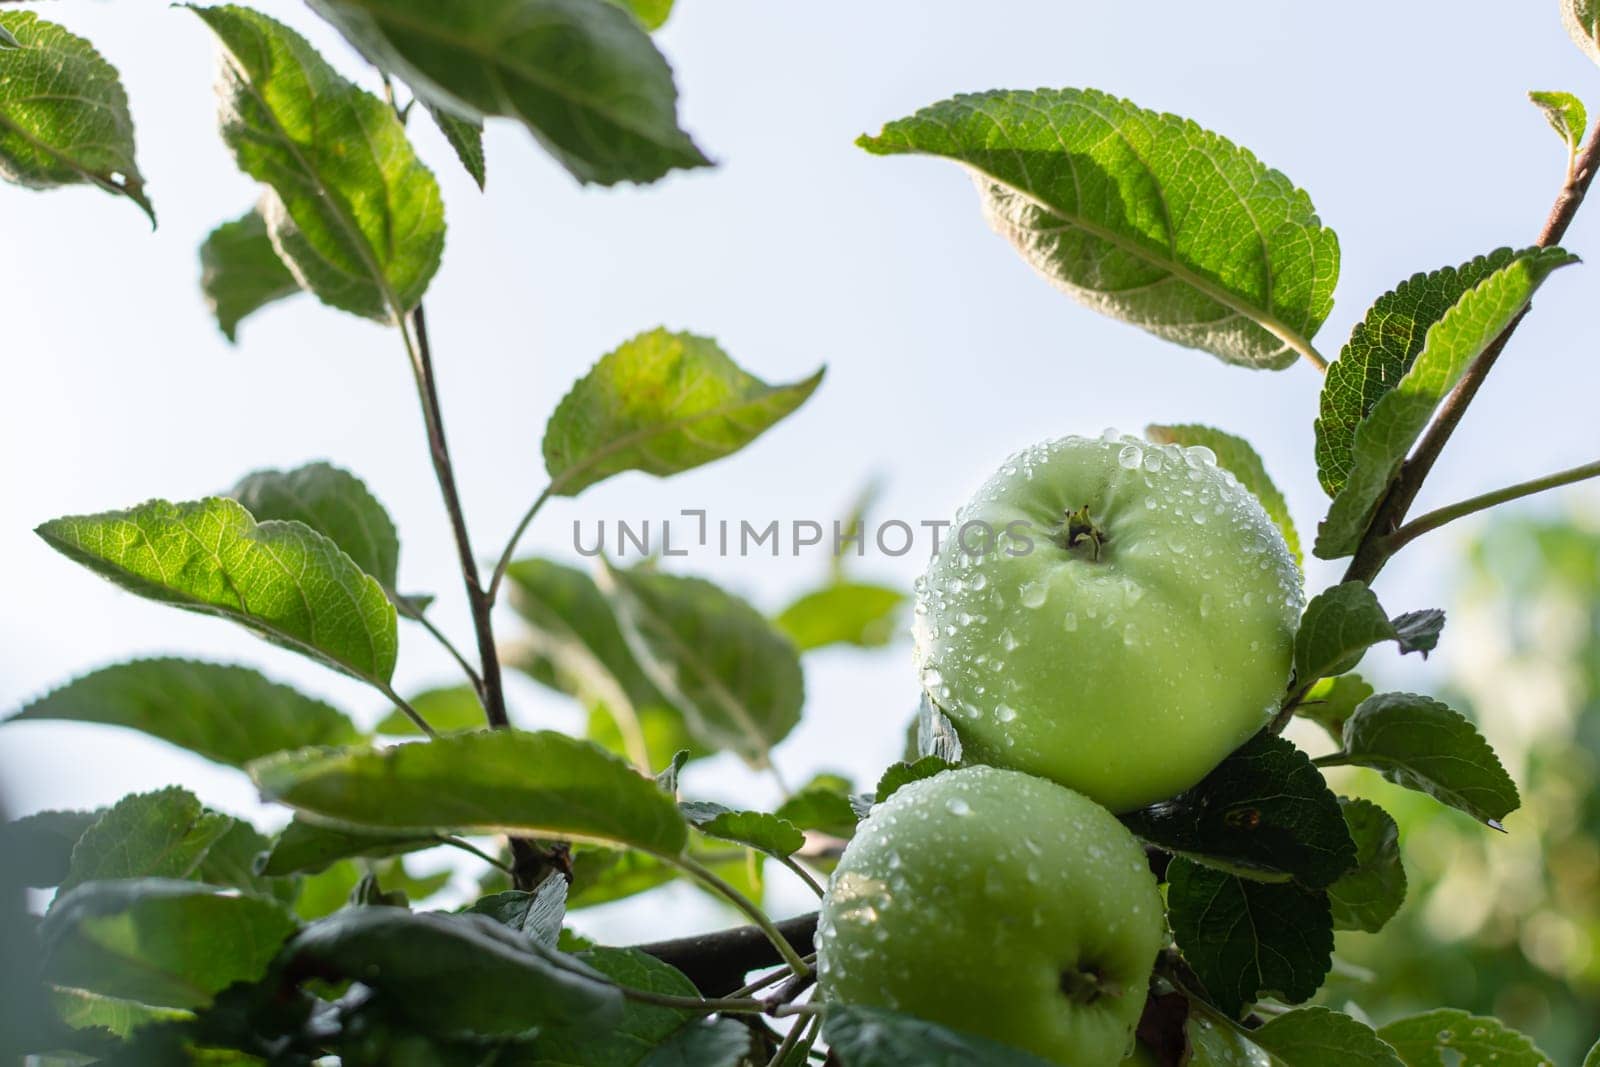 Ripening wet apples in raindrops on a branch in the garden by orebrik